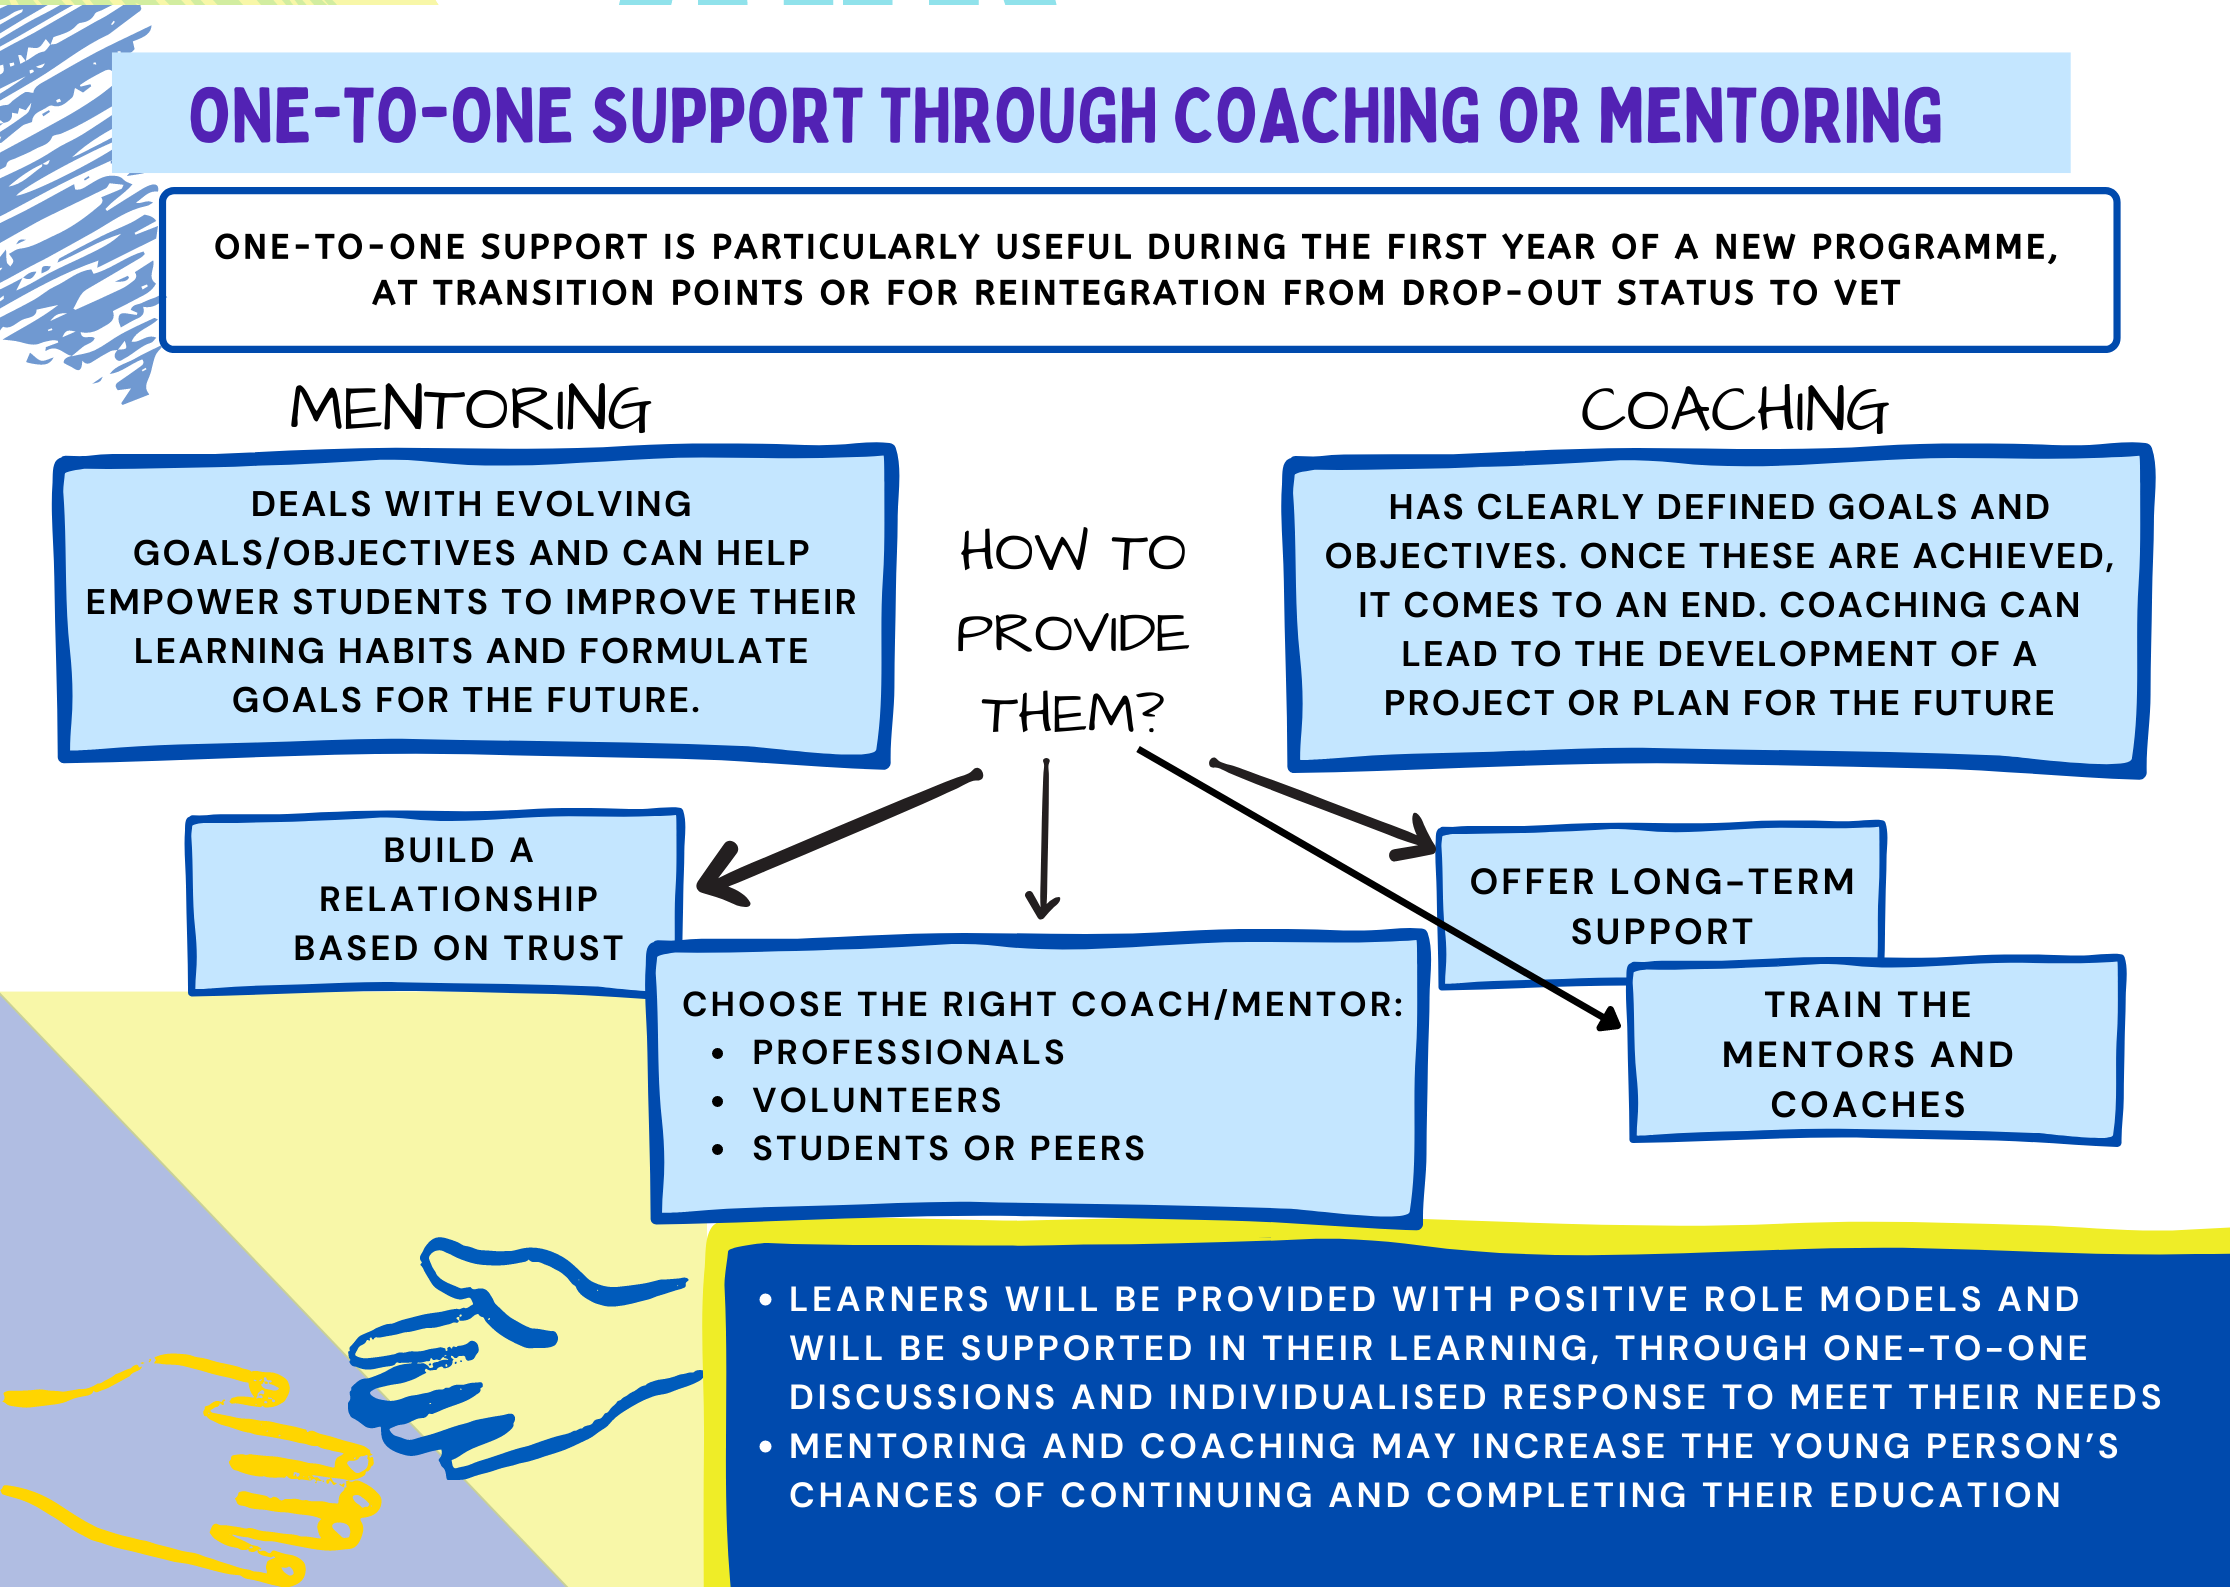 12_one-to-one support through coaching or mentoring